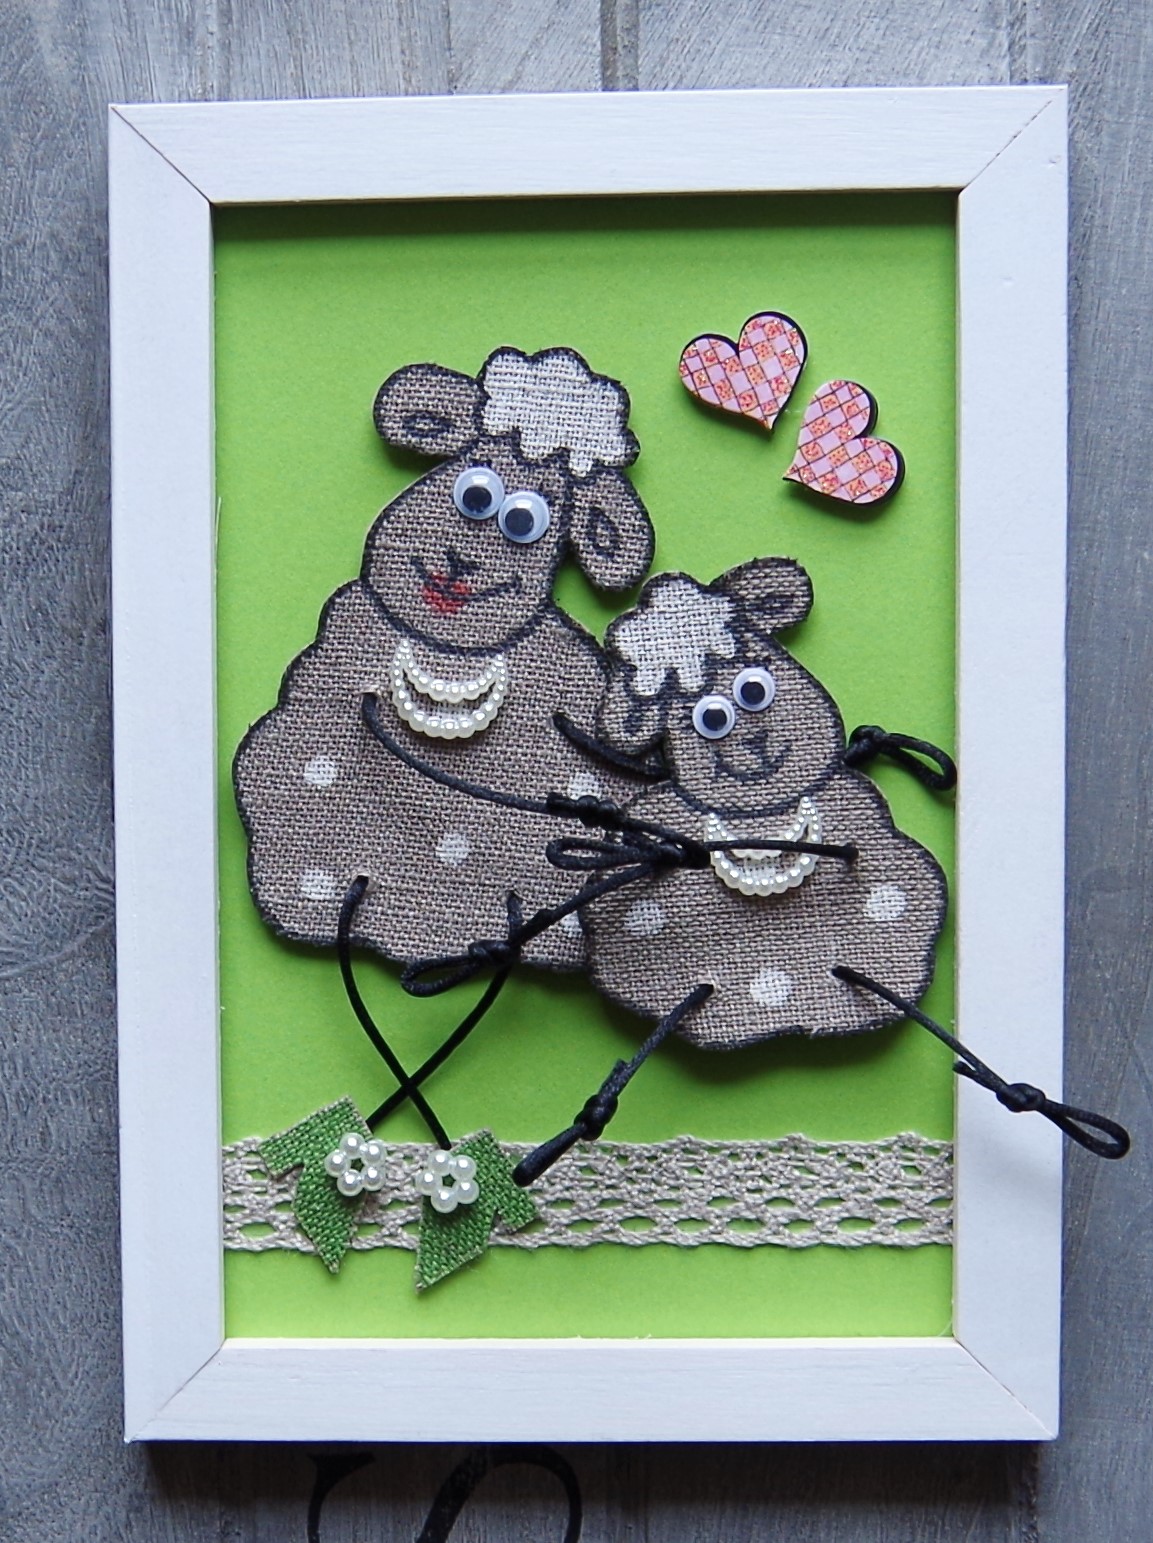 A framed card for Mother's Day. You can frame all of the cards if you like.